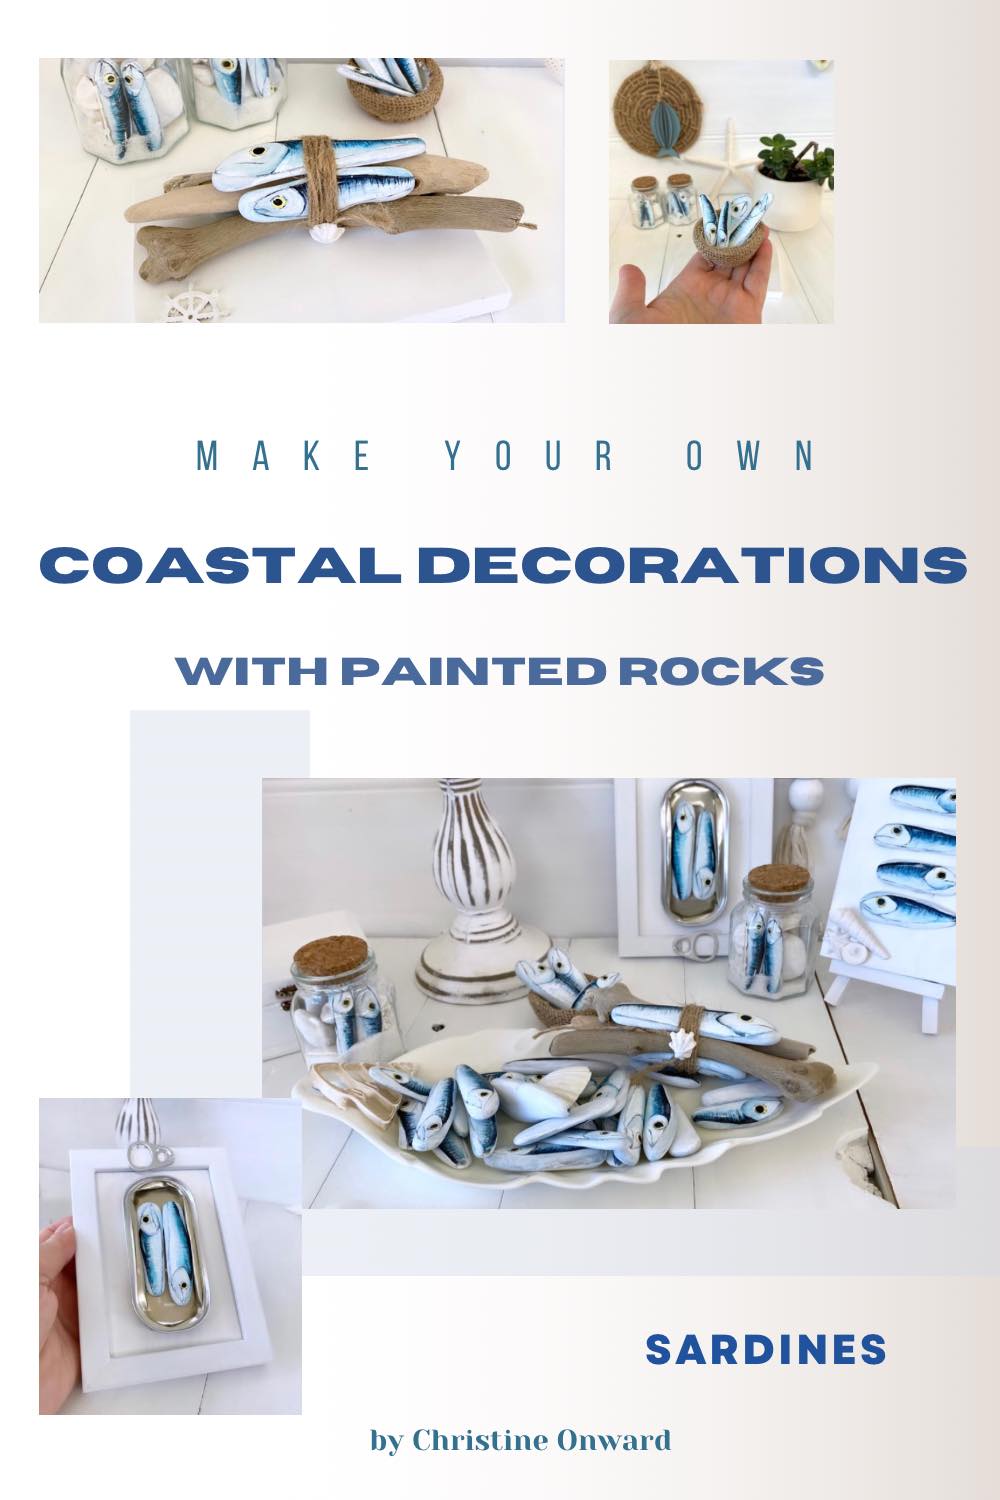 MAKE YOUR OWN COASTAL DECORATIONS WITH PAINTED ROCKS - part 1 SARDINES